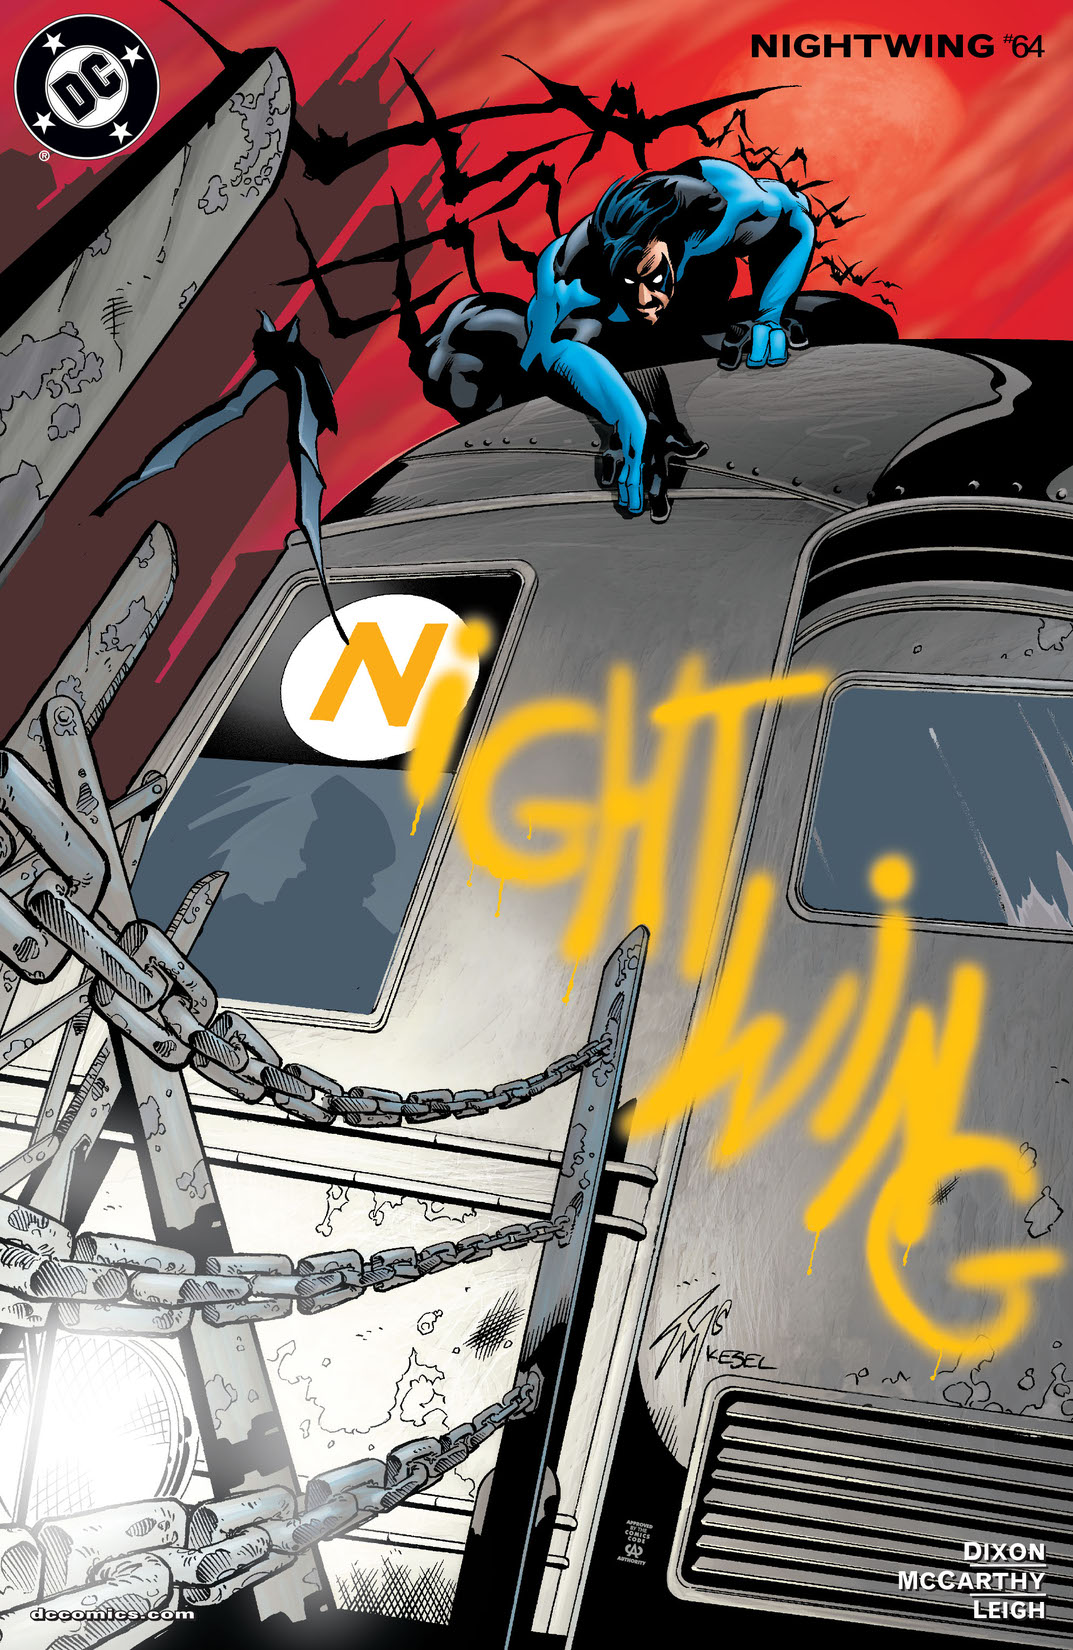 Nightwing (1996-) #64 preview images